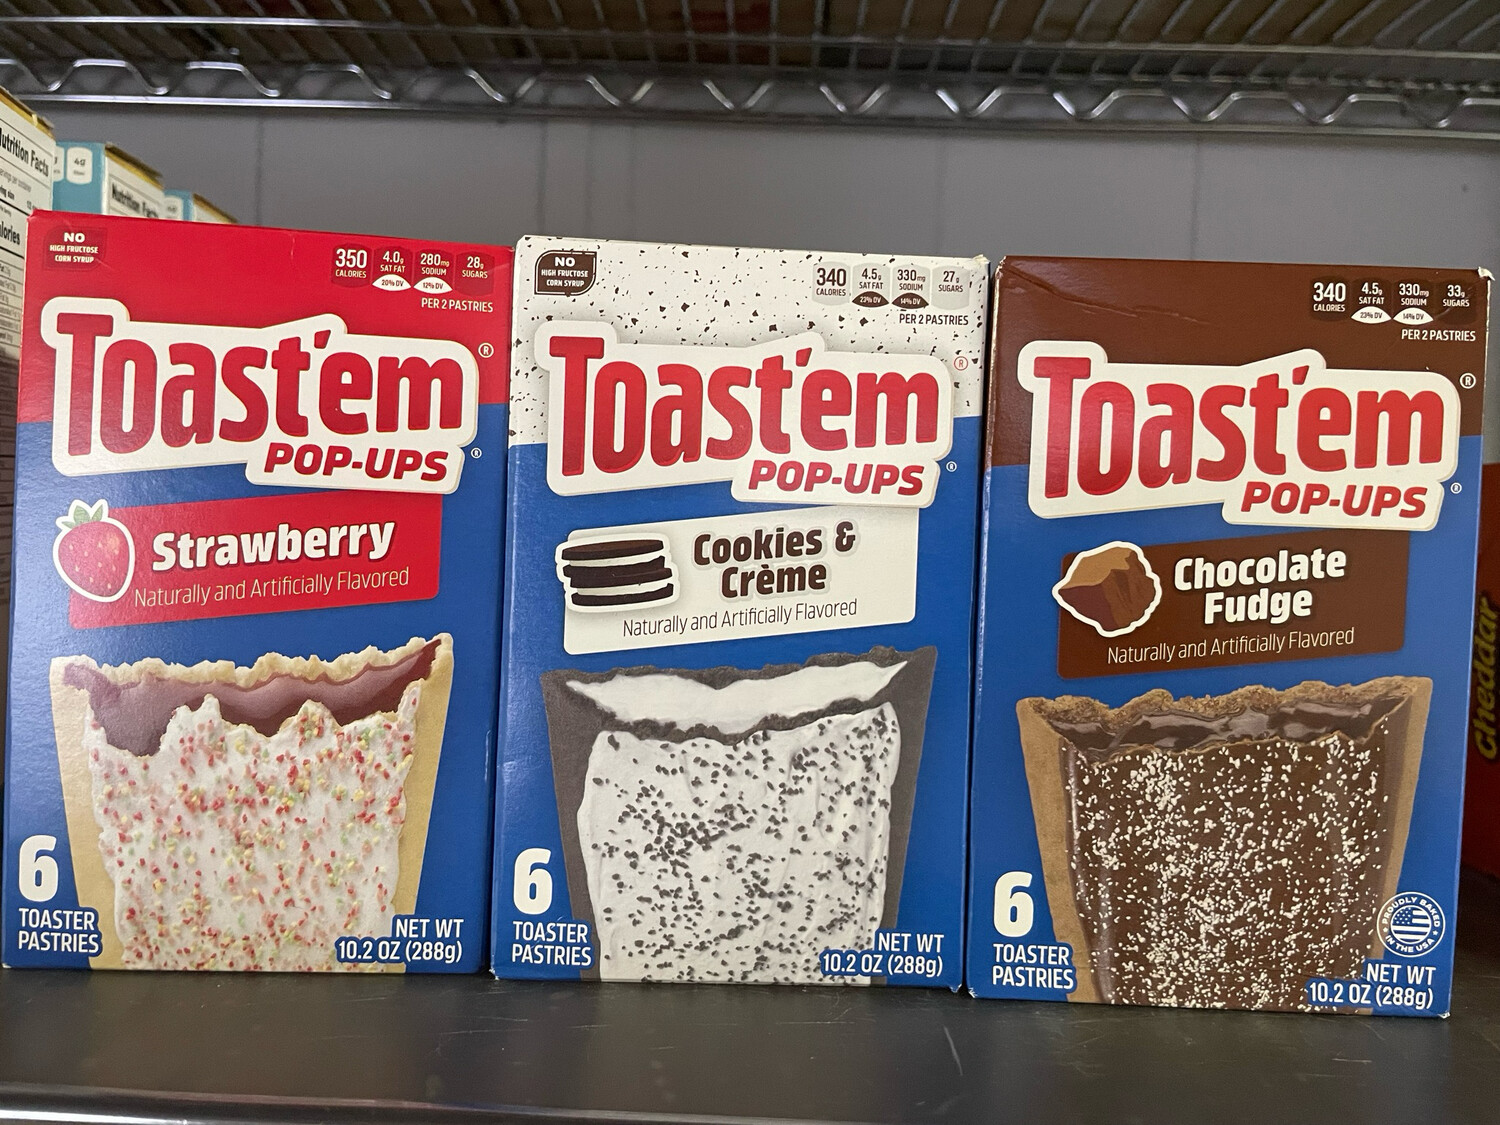 Toaster Pastry
(*LIMIT 1 per household*)